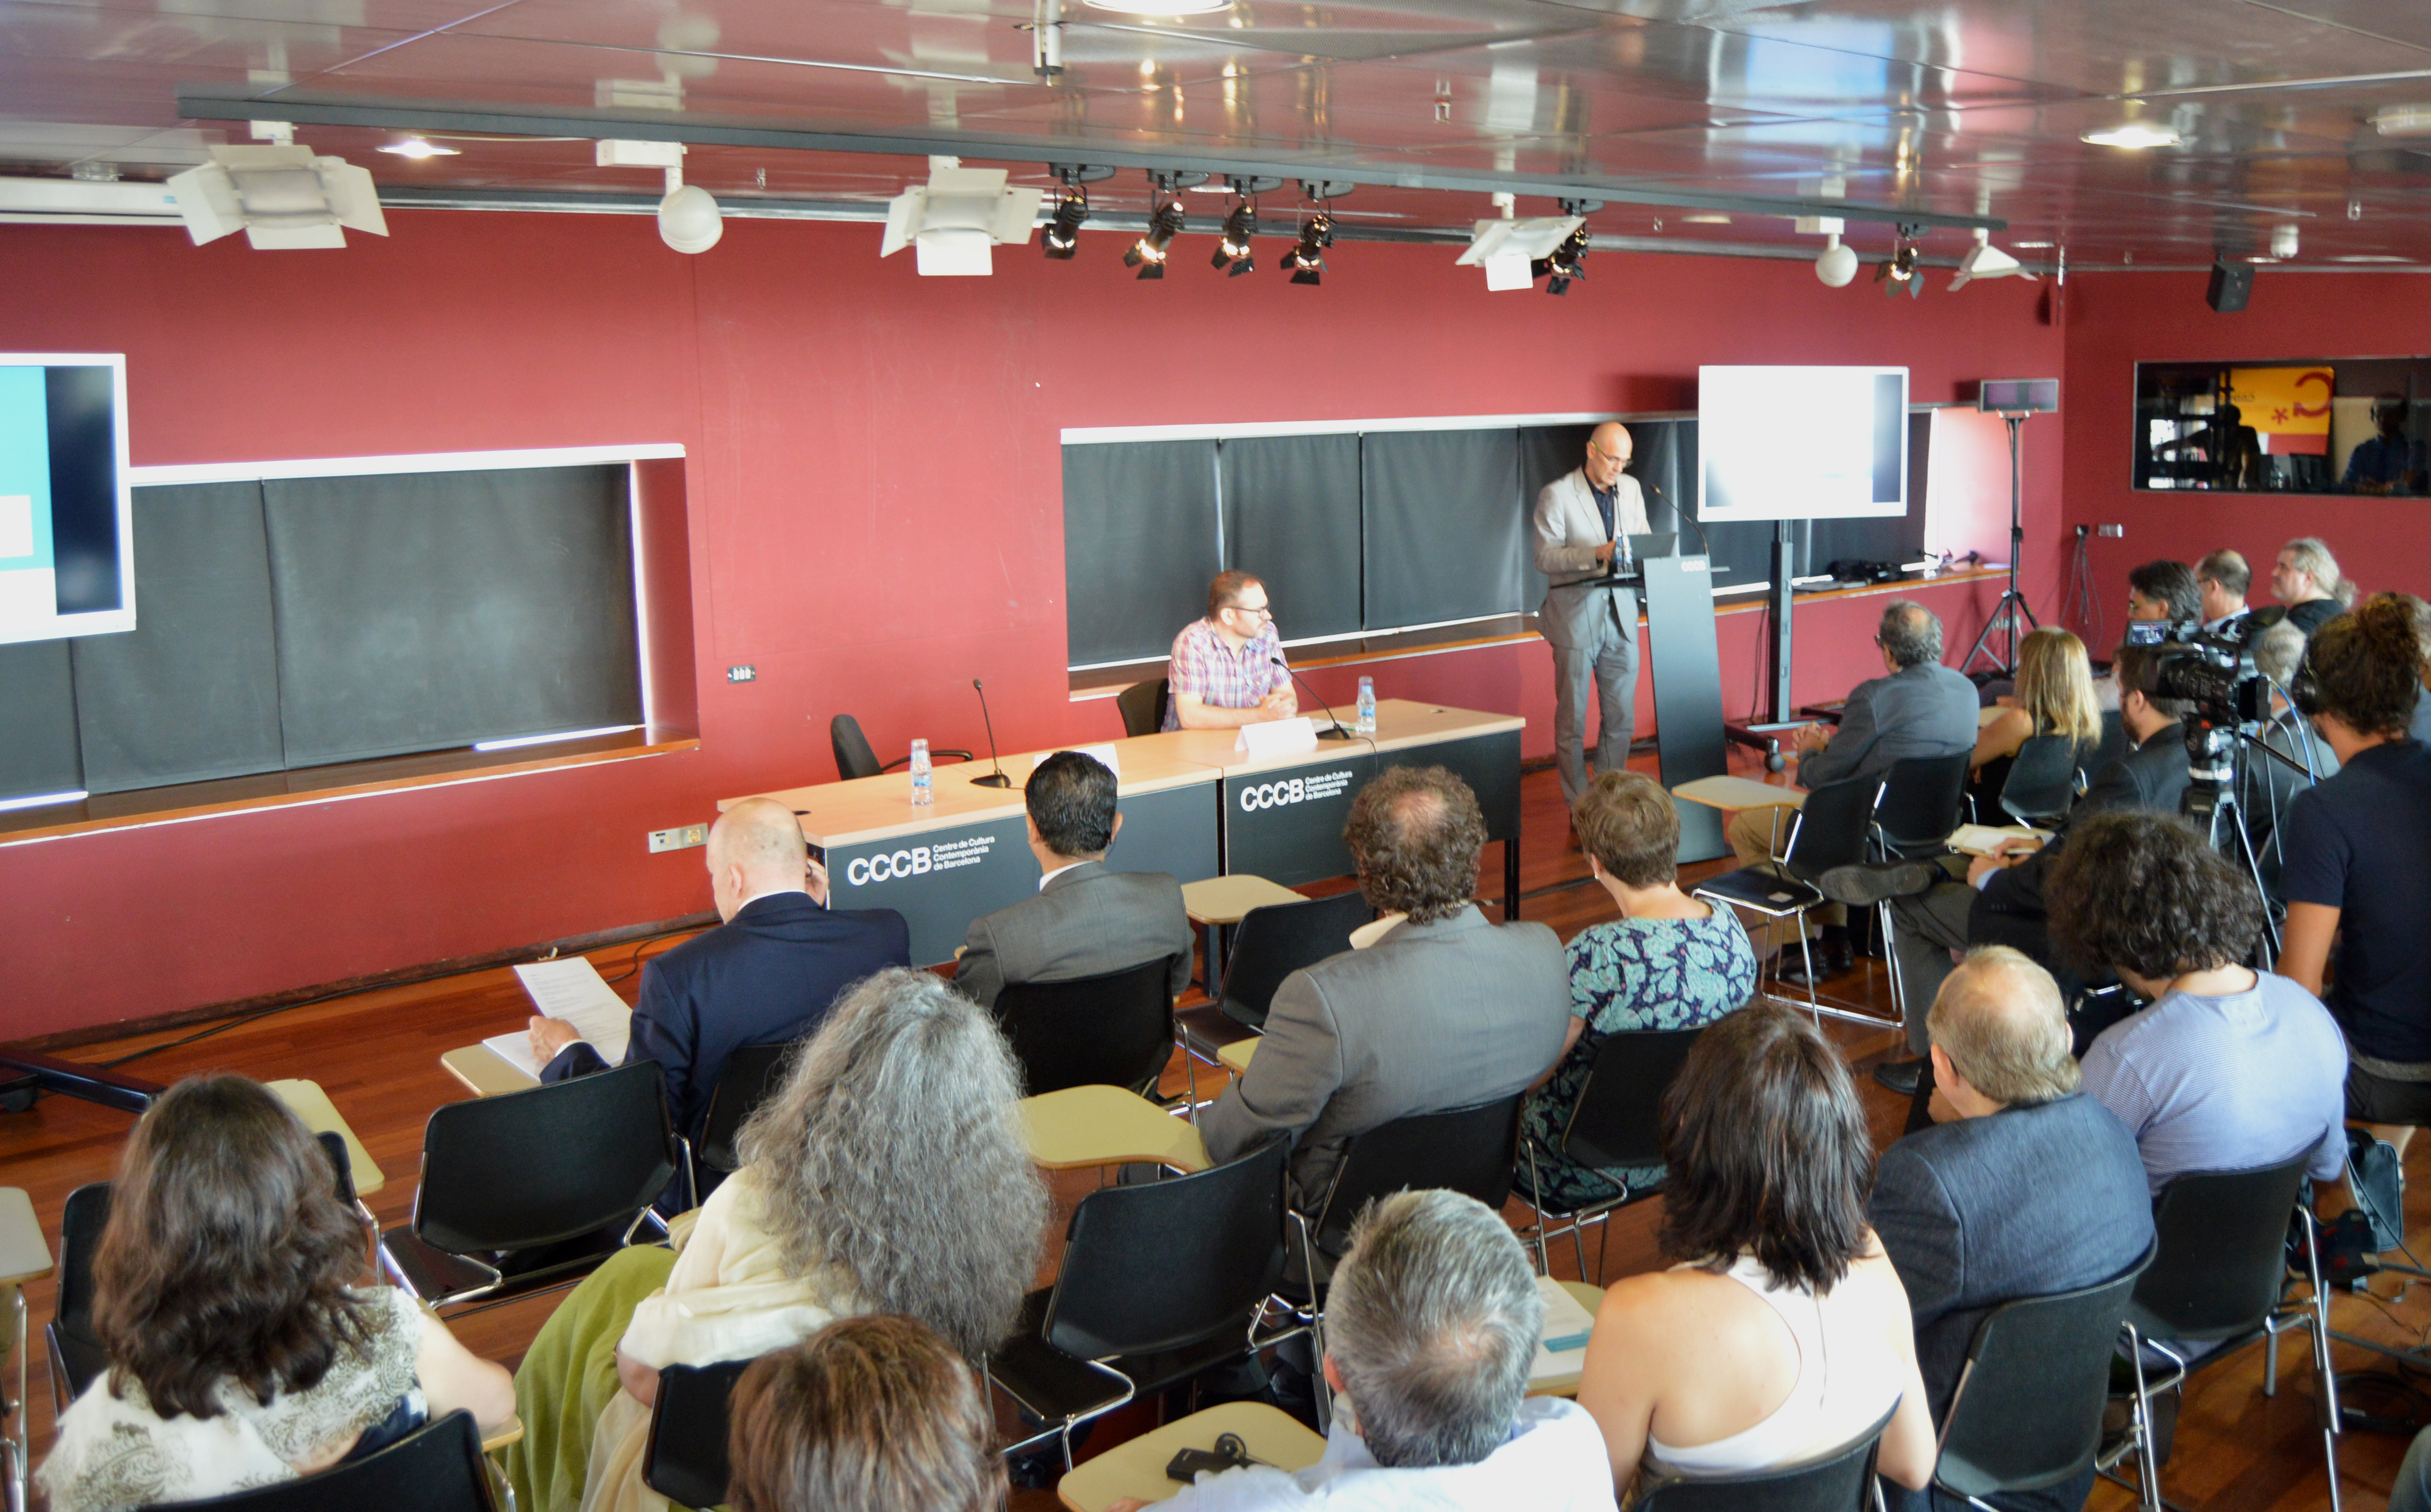 The audience in the seminar at Contemporary Culture Center of Barcelona